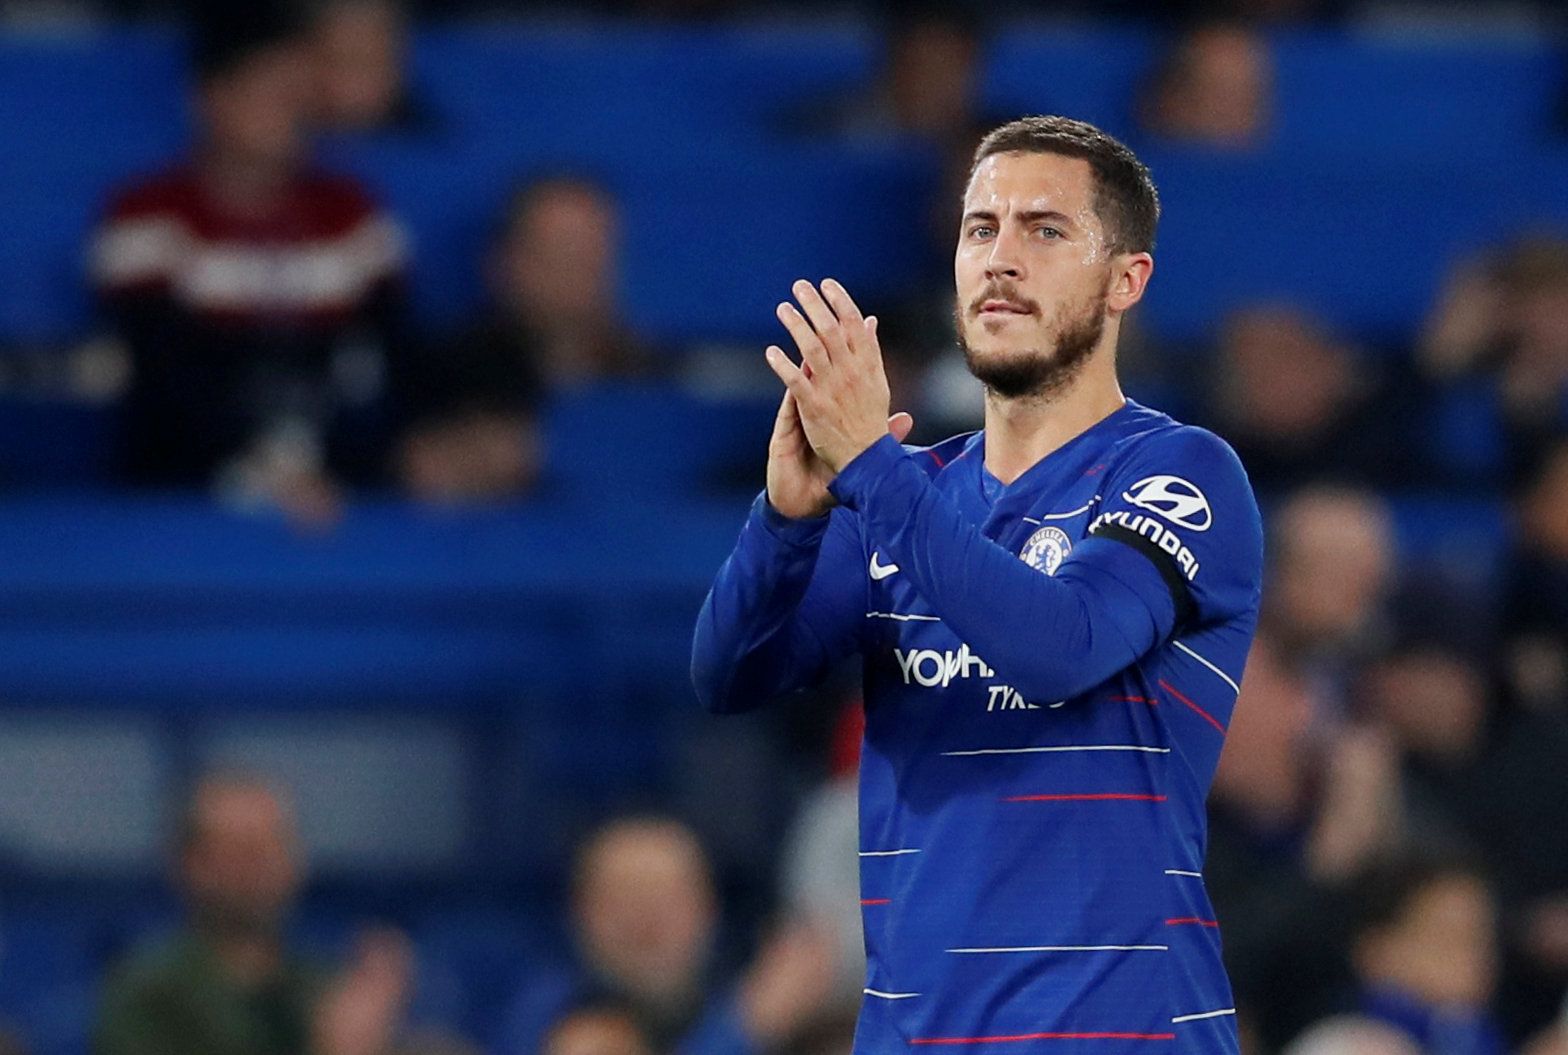 Soccer Football - Premier League - Chelsea v Crystal Palace - Stamford Bridge, London, Britain - November 4, 2018  Chelsea's Eden Hazard celebrates after the match  REUTERS/David Klein  EDITORIAL USE ONLY. No use with unauthorized audio, video, data, fixture lists, club/league logos or "live" services. Online in-match use limited to 75 images, no video emulation. No use in betting, games or single club/league/player publications.  Please contact your account representative for further details.